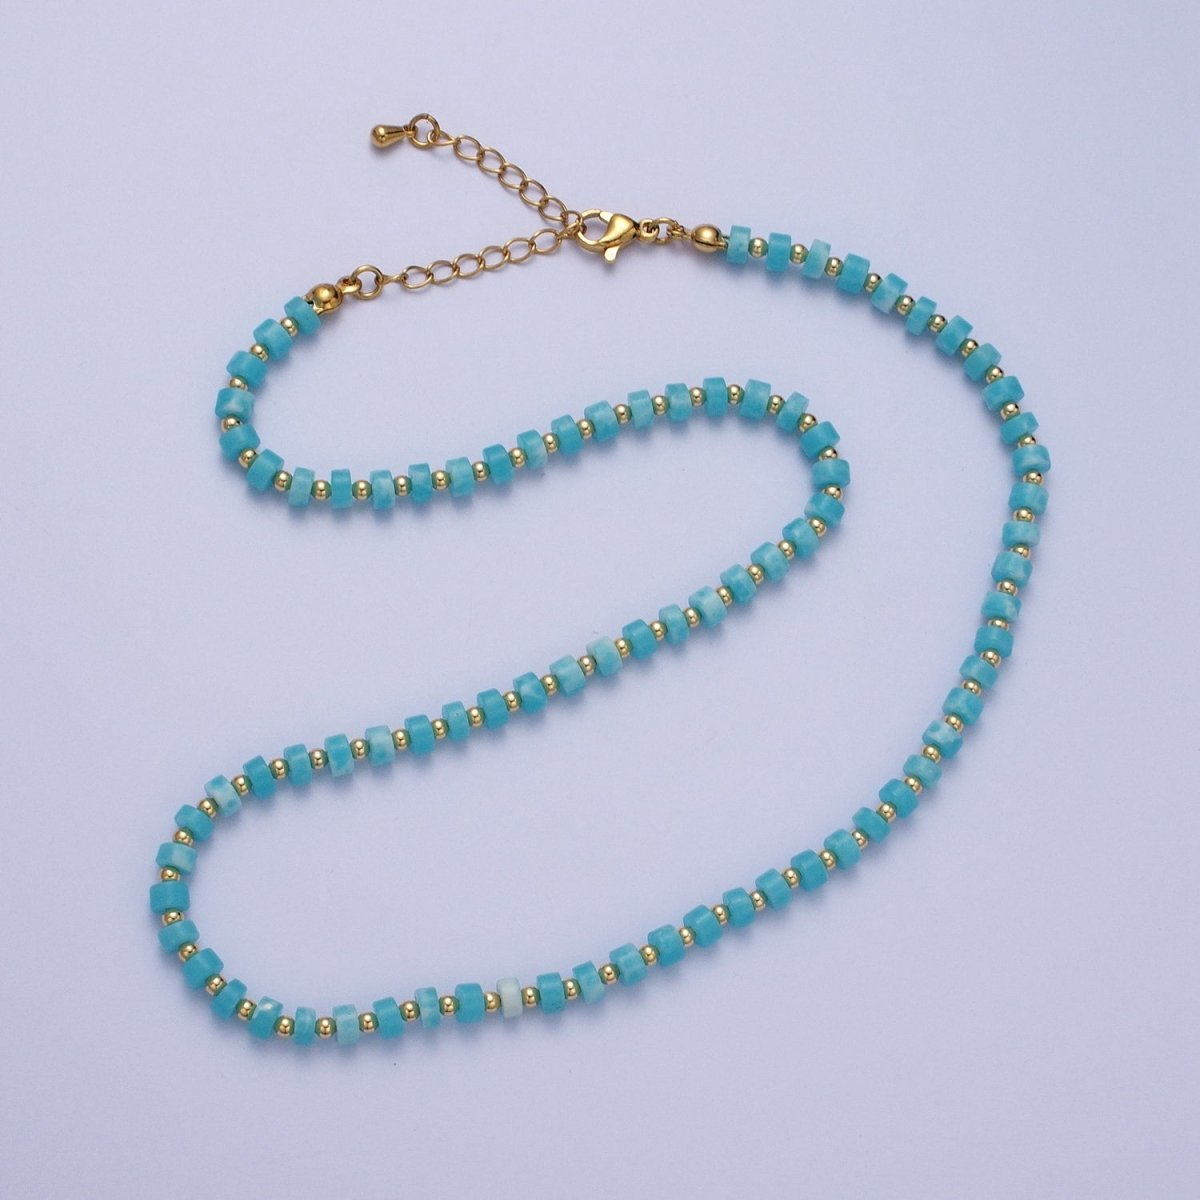 Gold Filled Peruvian Blue Opal Rondelle Heishi Gemstone Gold Spacer Beads 15.5 Inch Choker Necklace | WA-1428 Clearance Pricing - DLUXCA